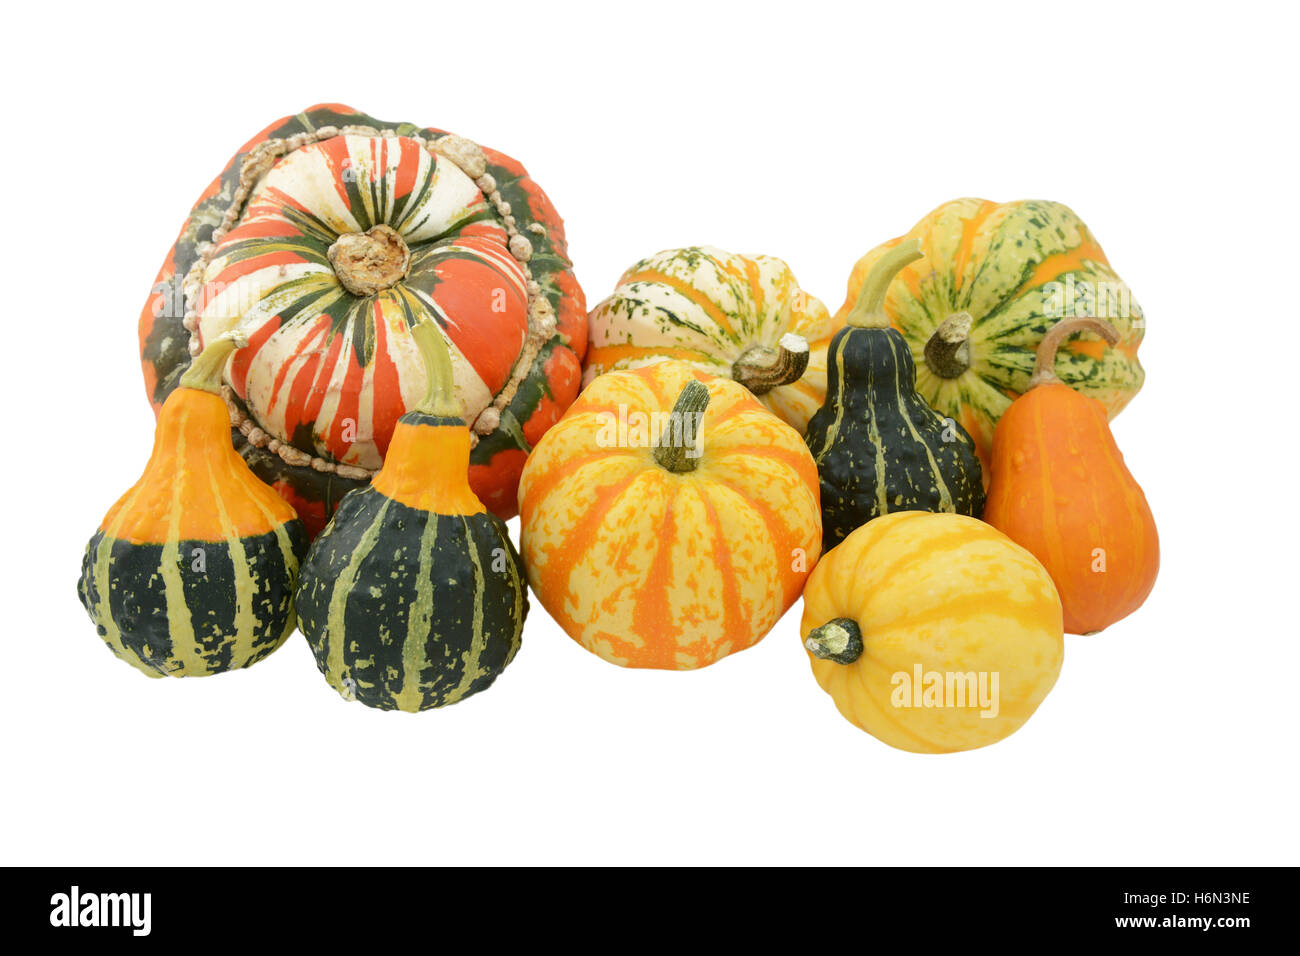 Selection of ornamental gourds with striped Turks turban squash and yellow and green Festival squash Stock Photo